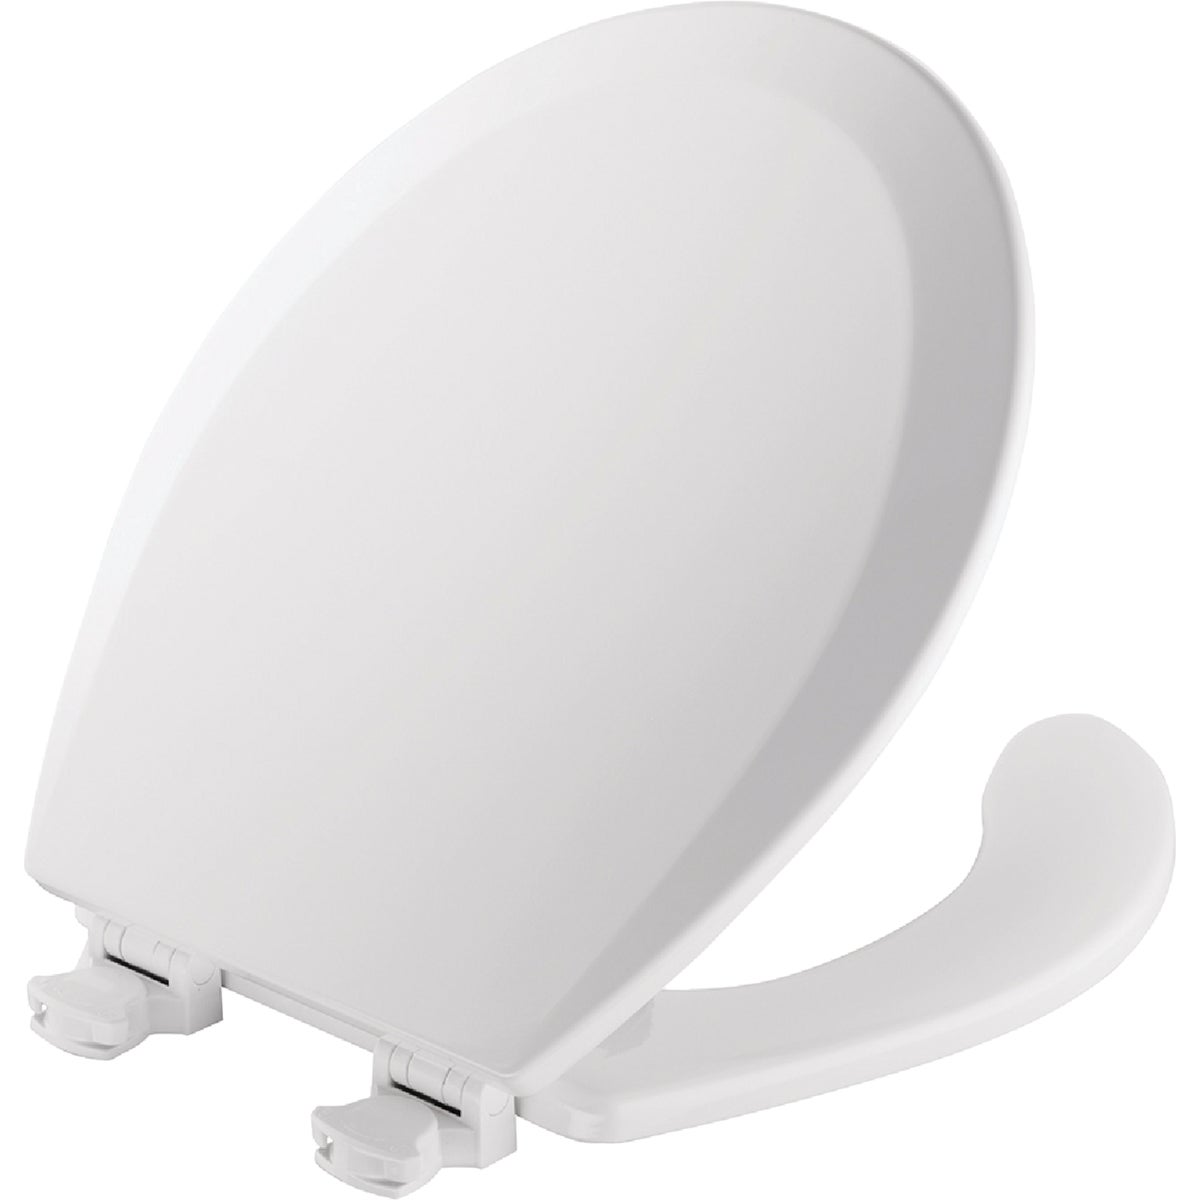 MAYFAIR 8440EC 000 Open Front Toilet Seat will Never Loosen and Easily Remove, ROUND, Durable Enameled Wood, White